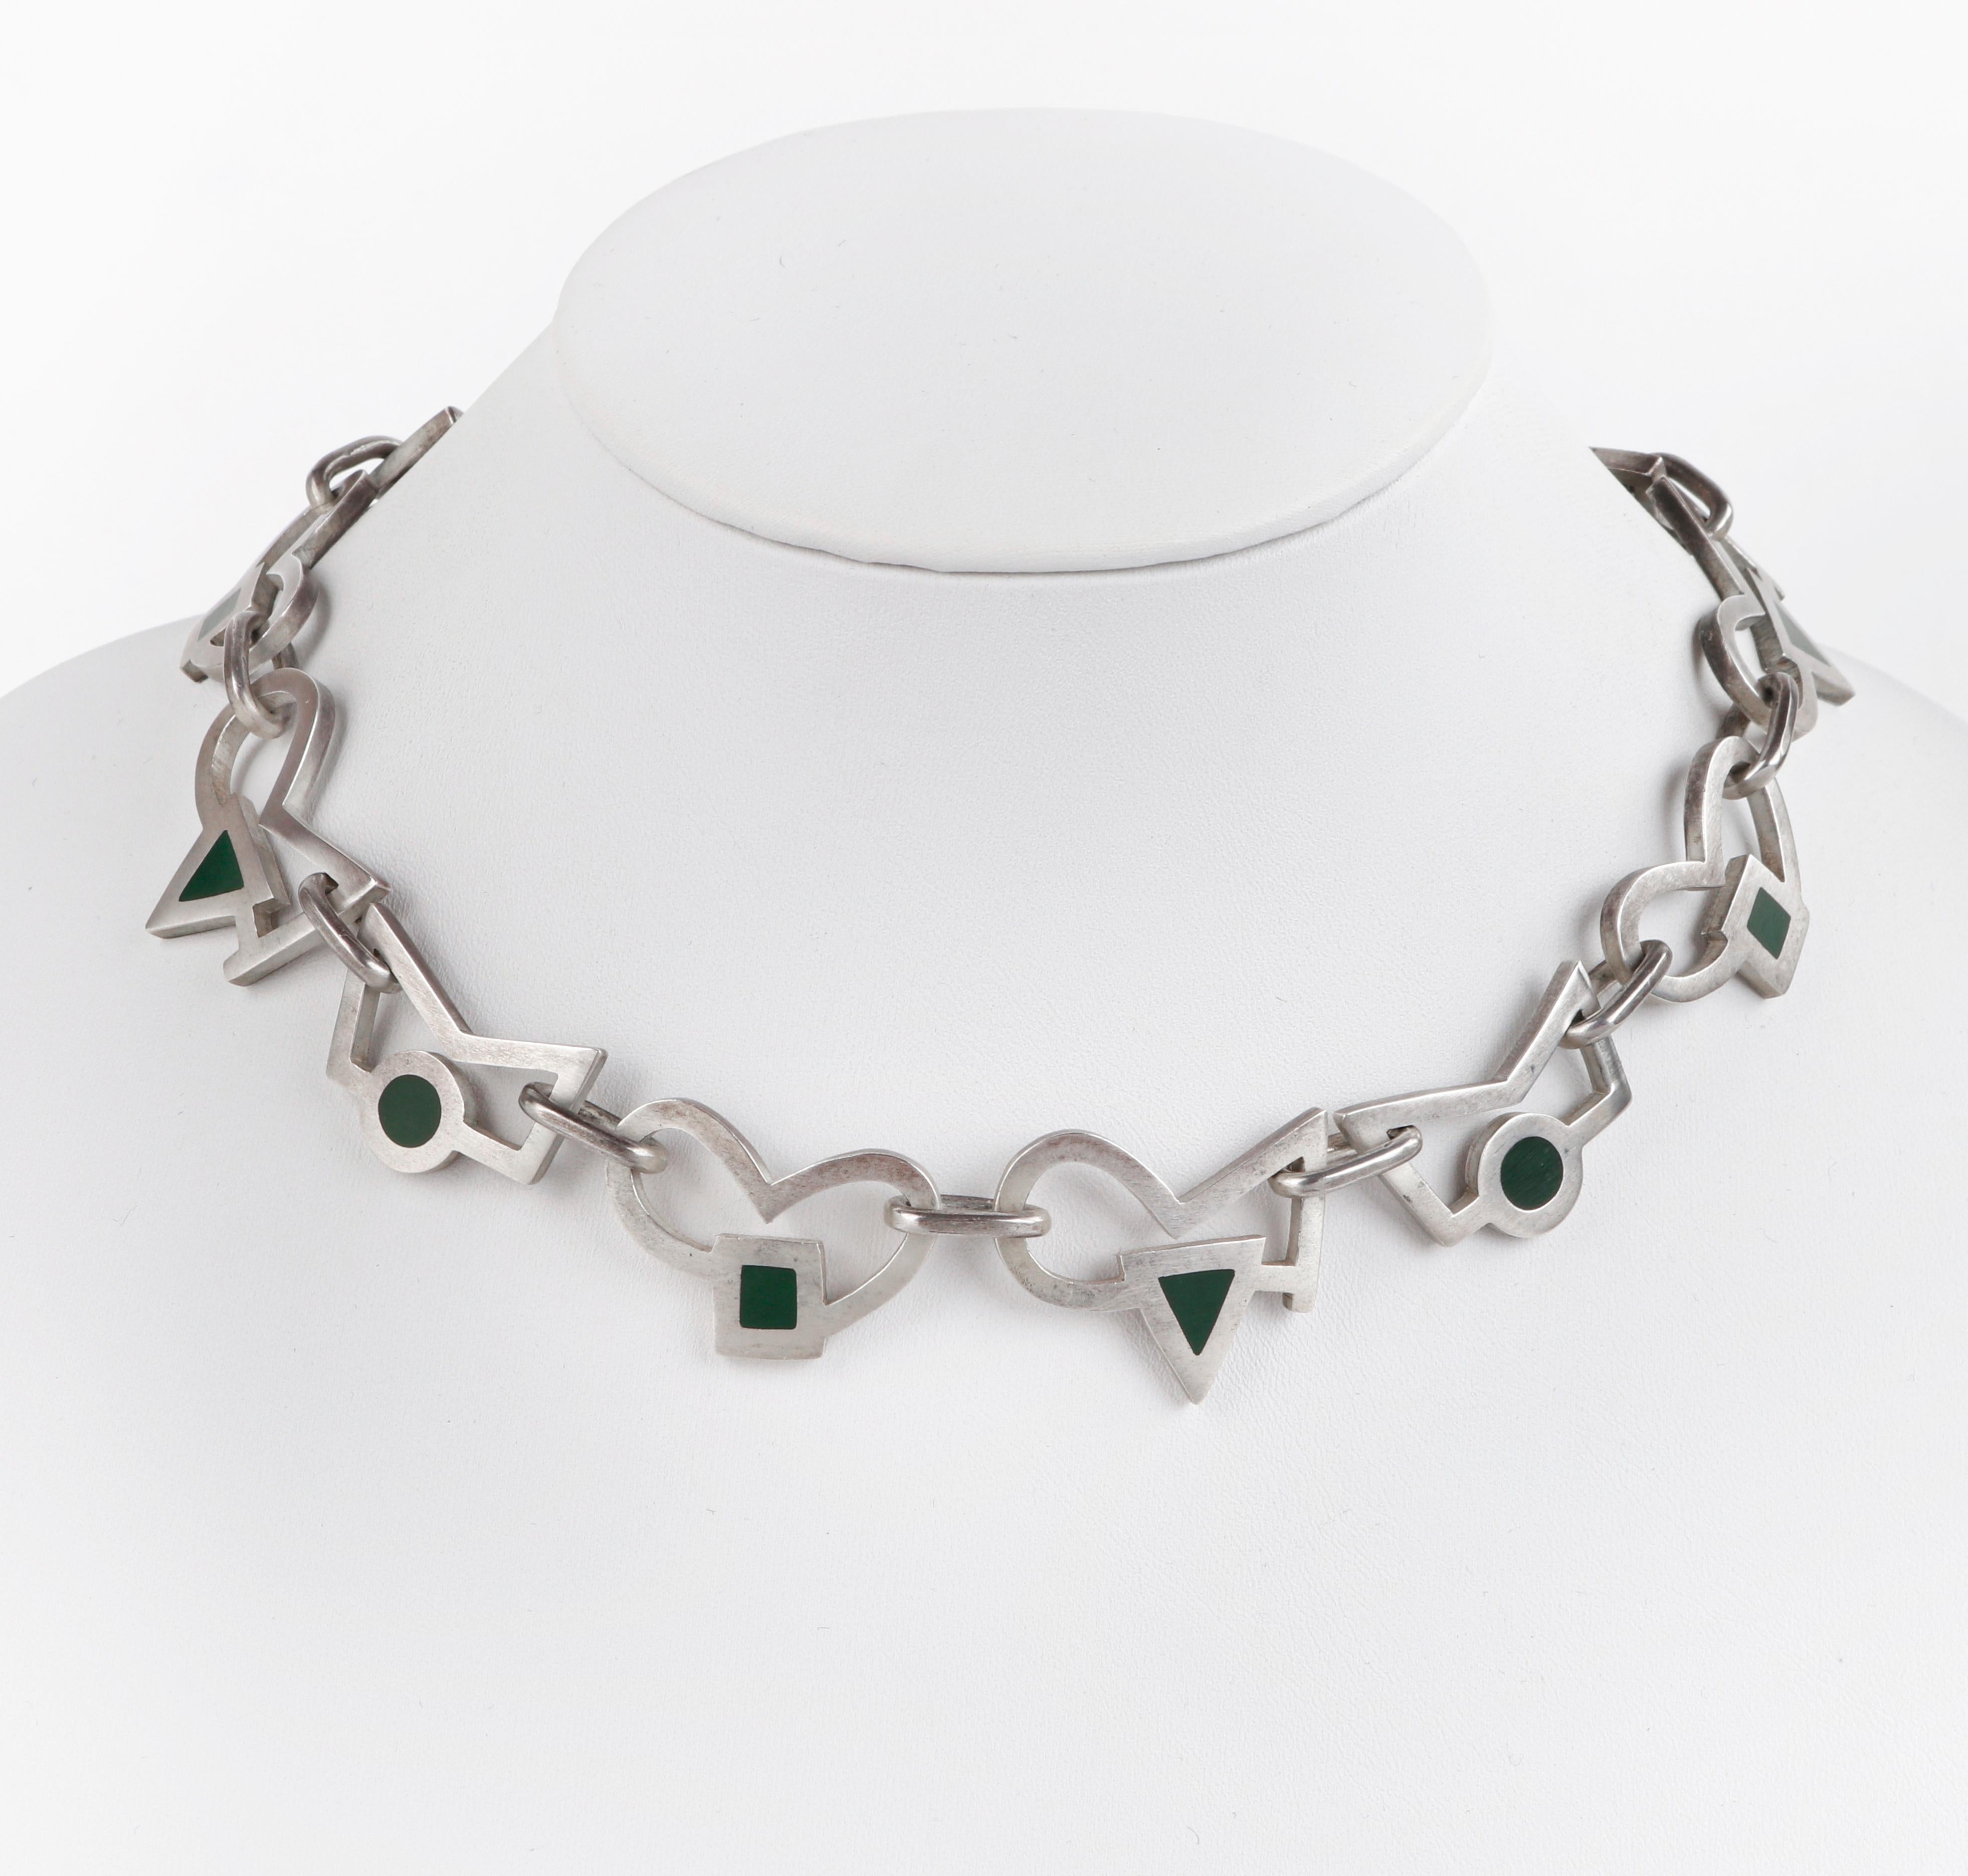 JAN GJALTEMA Stirling Silver Green Accented Abstract Shape Necklace Earring Set
 
Brand / Manufacturer: Jan Gjaltema
Style: Necklace; stud earrings
Color(s): Silver and green
Marked Material: “925” Sterling silver
Unmarked Material (feel of): Resin